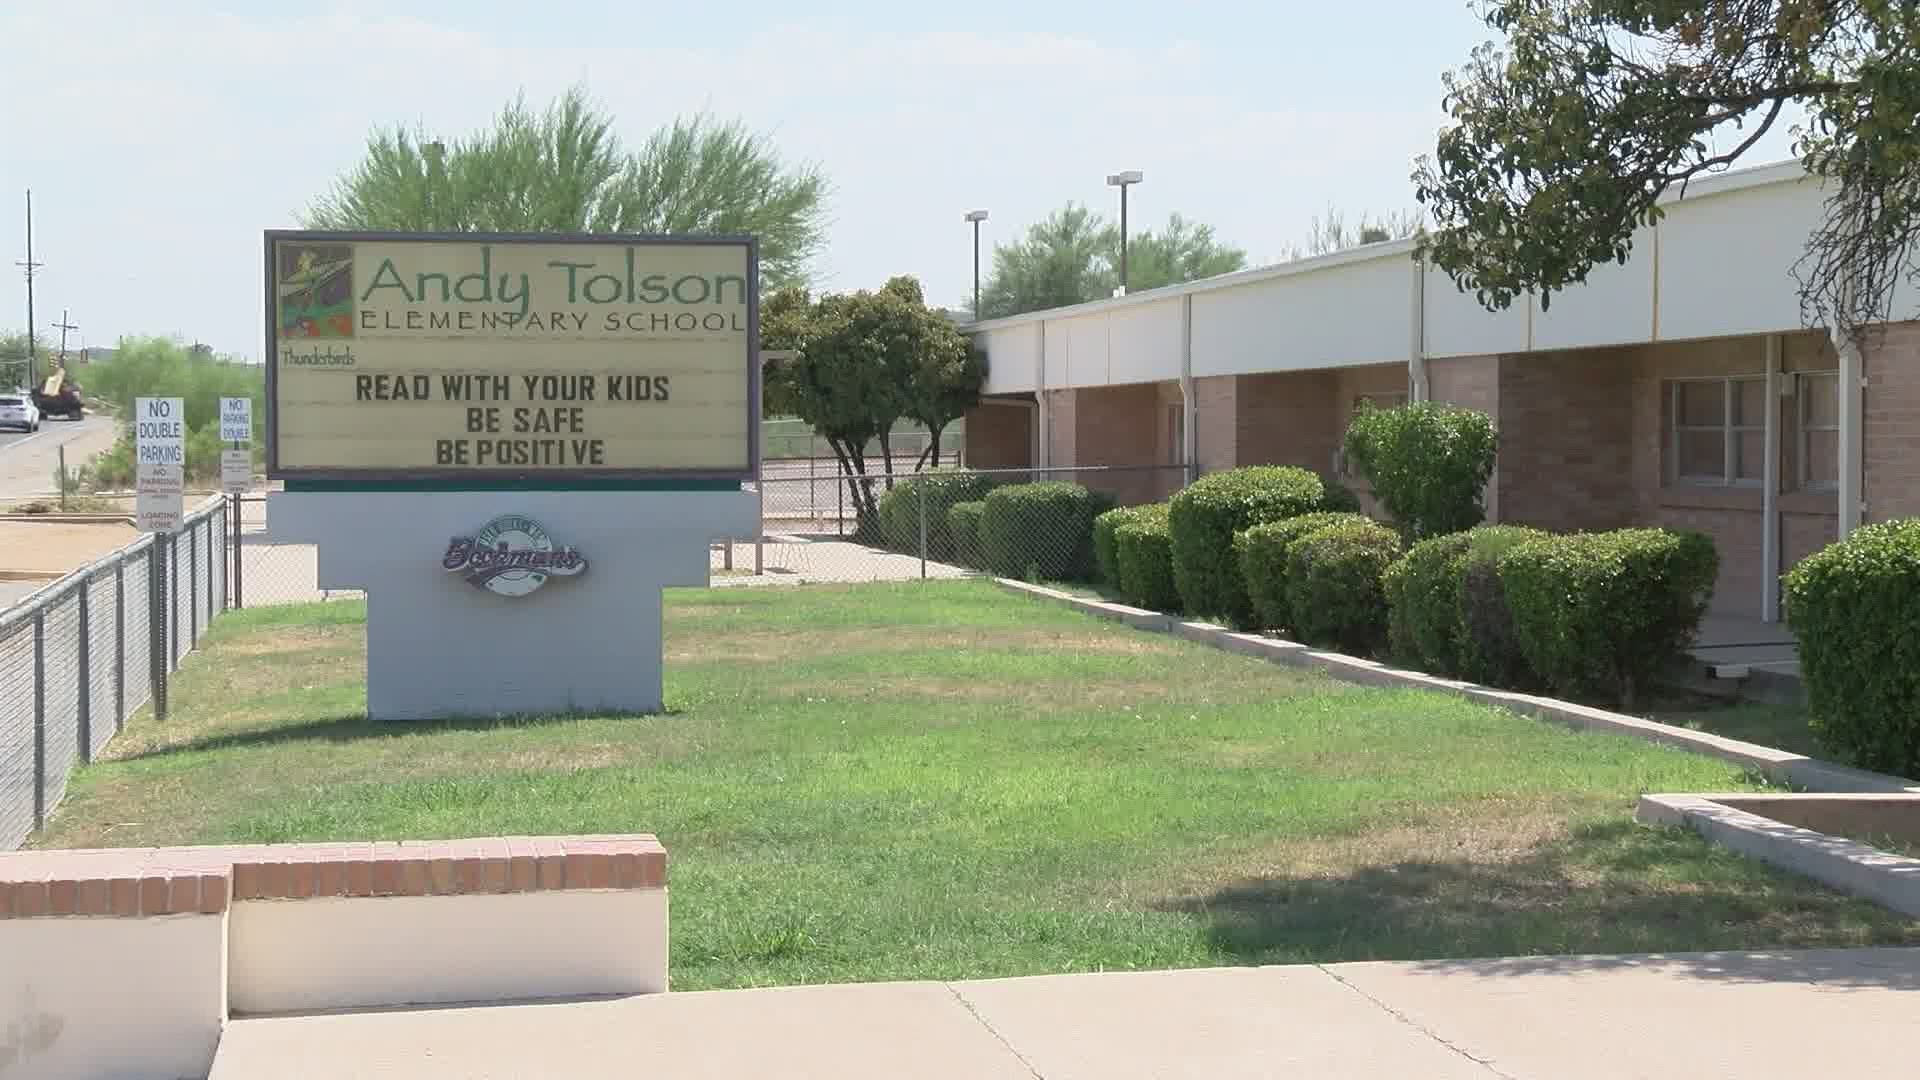 Tucson's largest school district is shutting down an elementary school after two staff members tested positive for COVID-19.